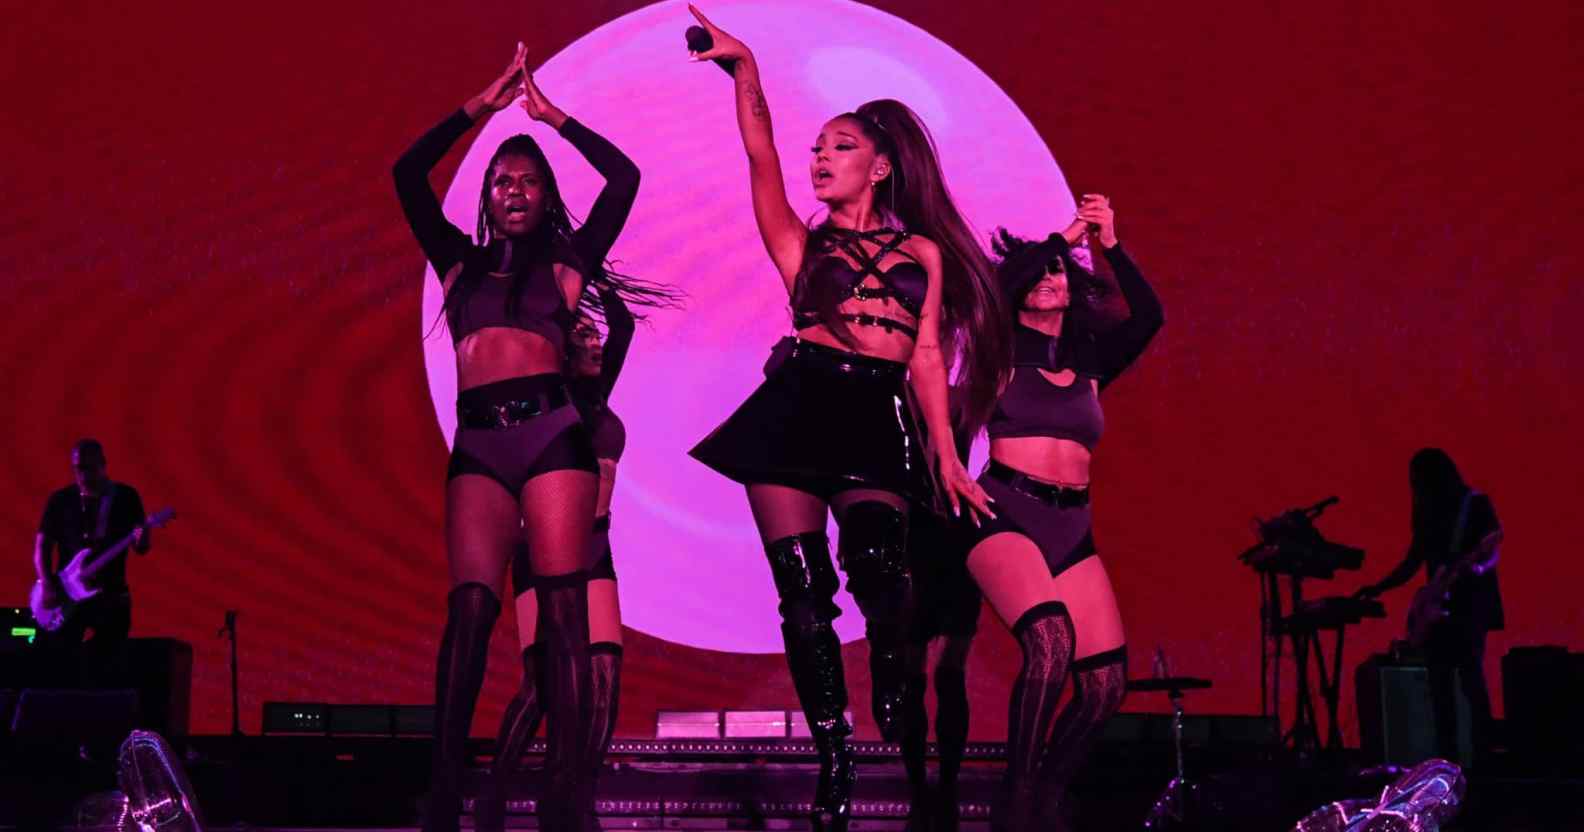 Ariana Grande and dancers on stage, drenched in pink lighting